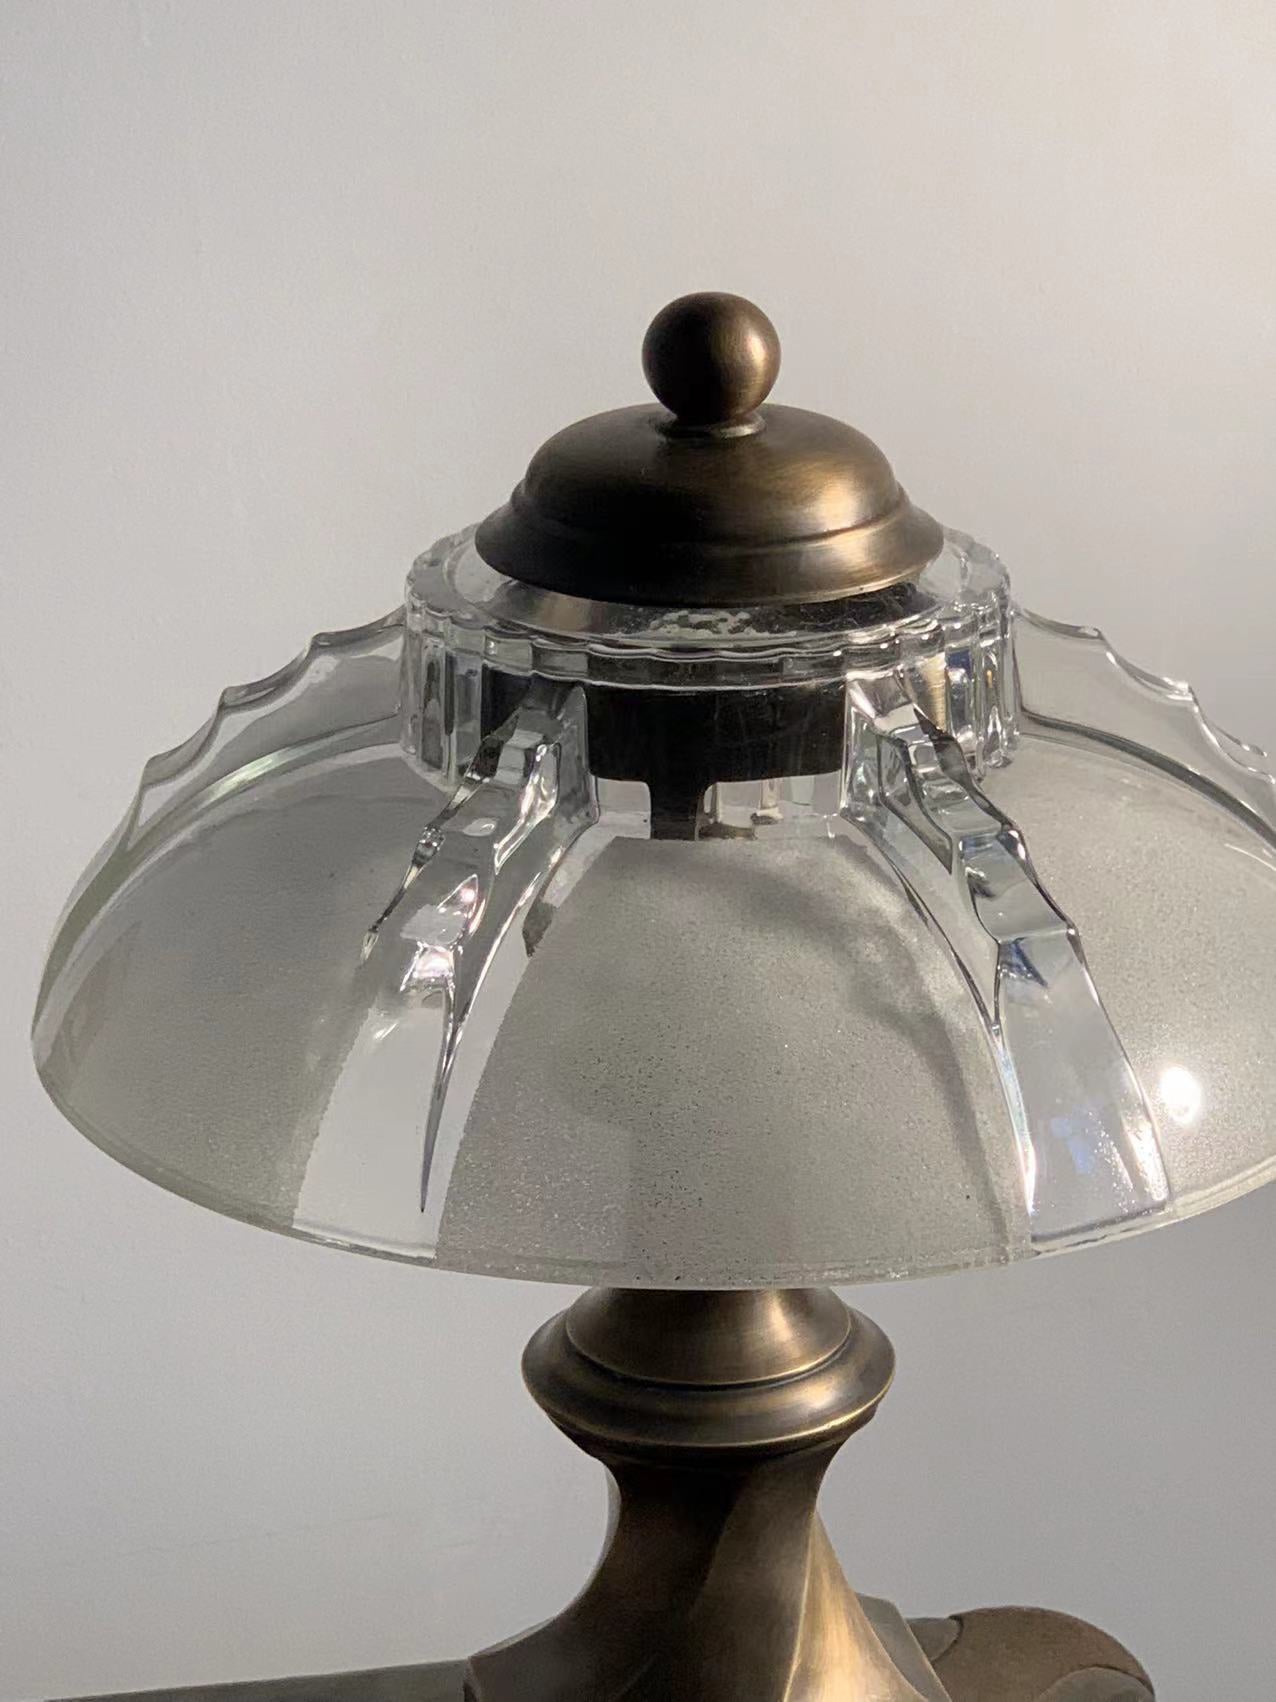 Brassco - Vintage Industrial Table Lamp with Art-Deco Glass 12'' Shade